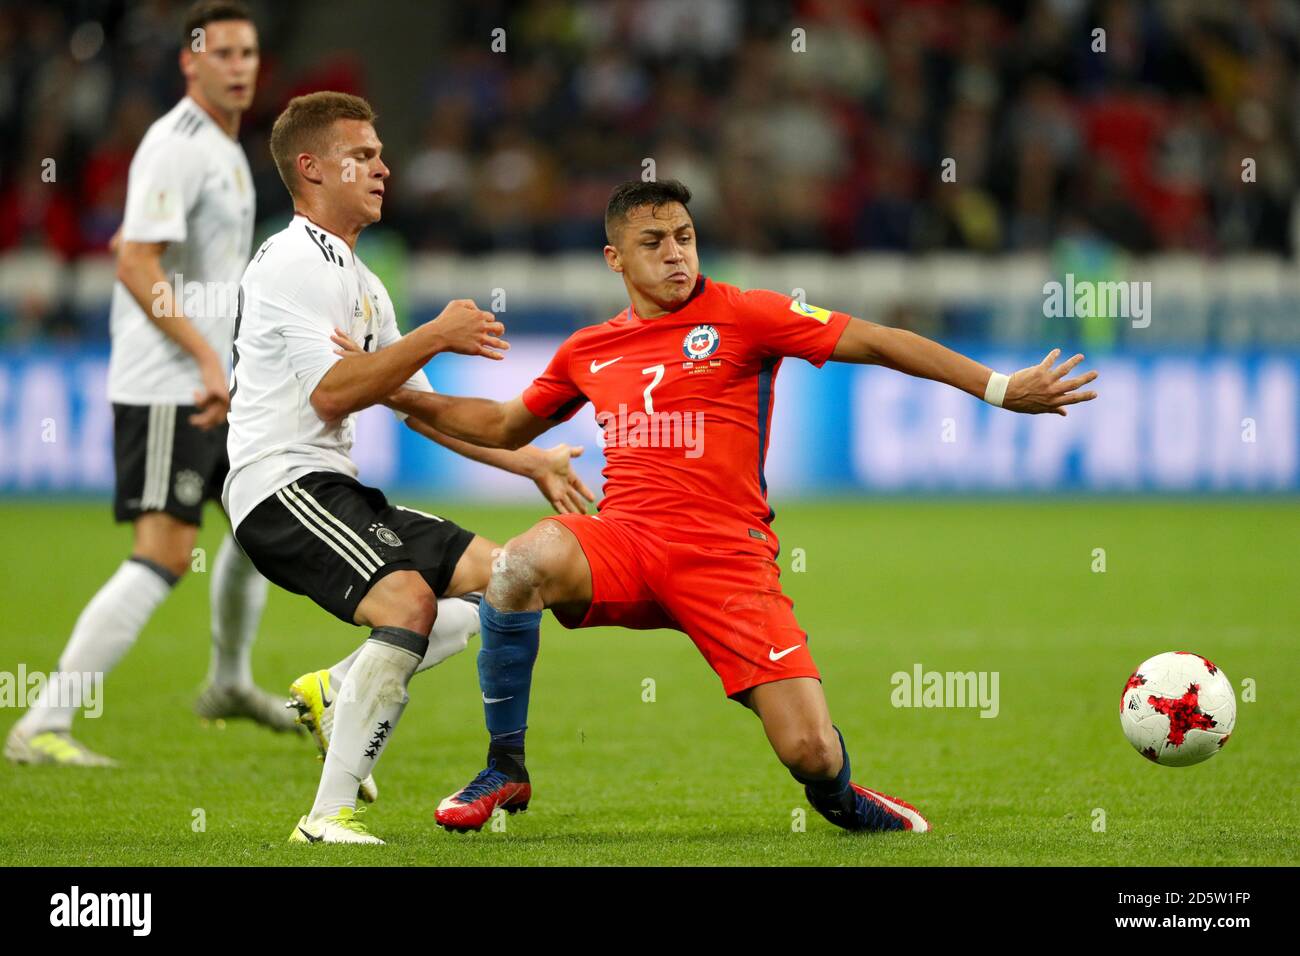 Germany's Joshua Kimmich (left) and Chile's Alexis Sanchez battle for the ball Stock Photo